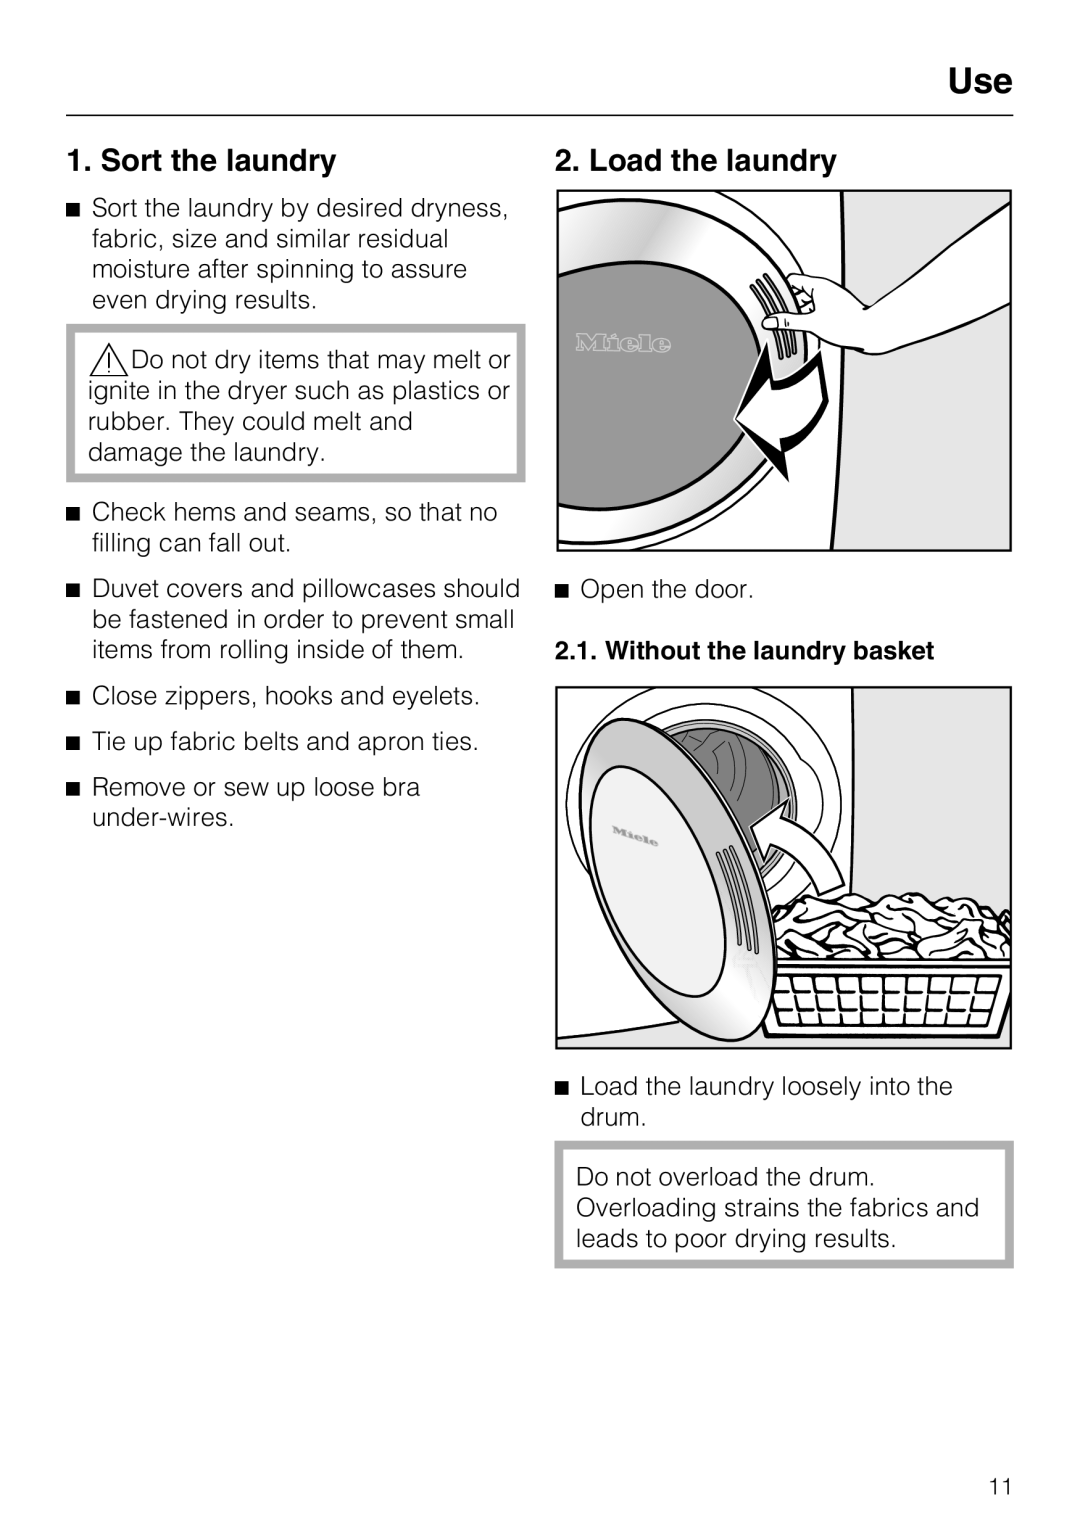 Miele T 9820 operating instructions Use, Sort the laundry, Load the laundry, Without the laundry basket 